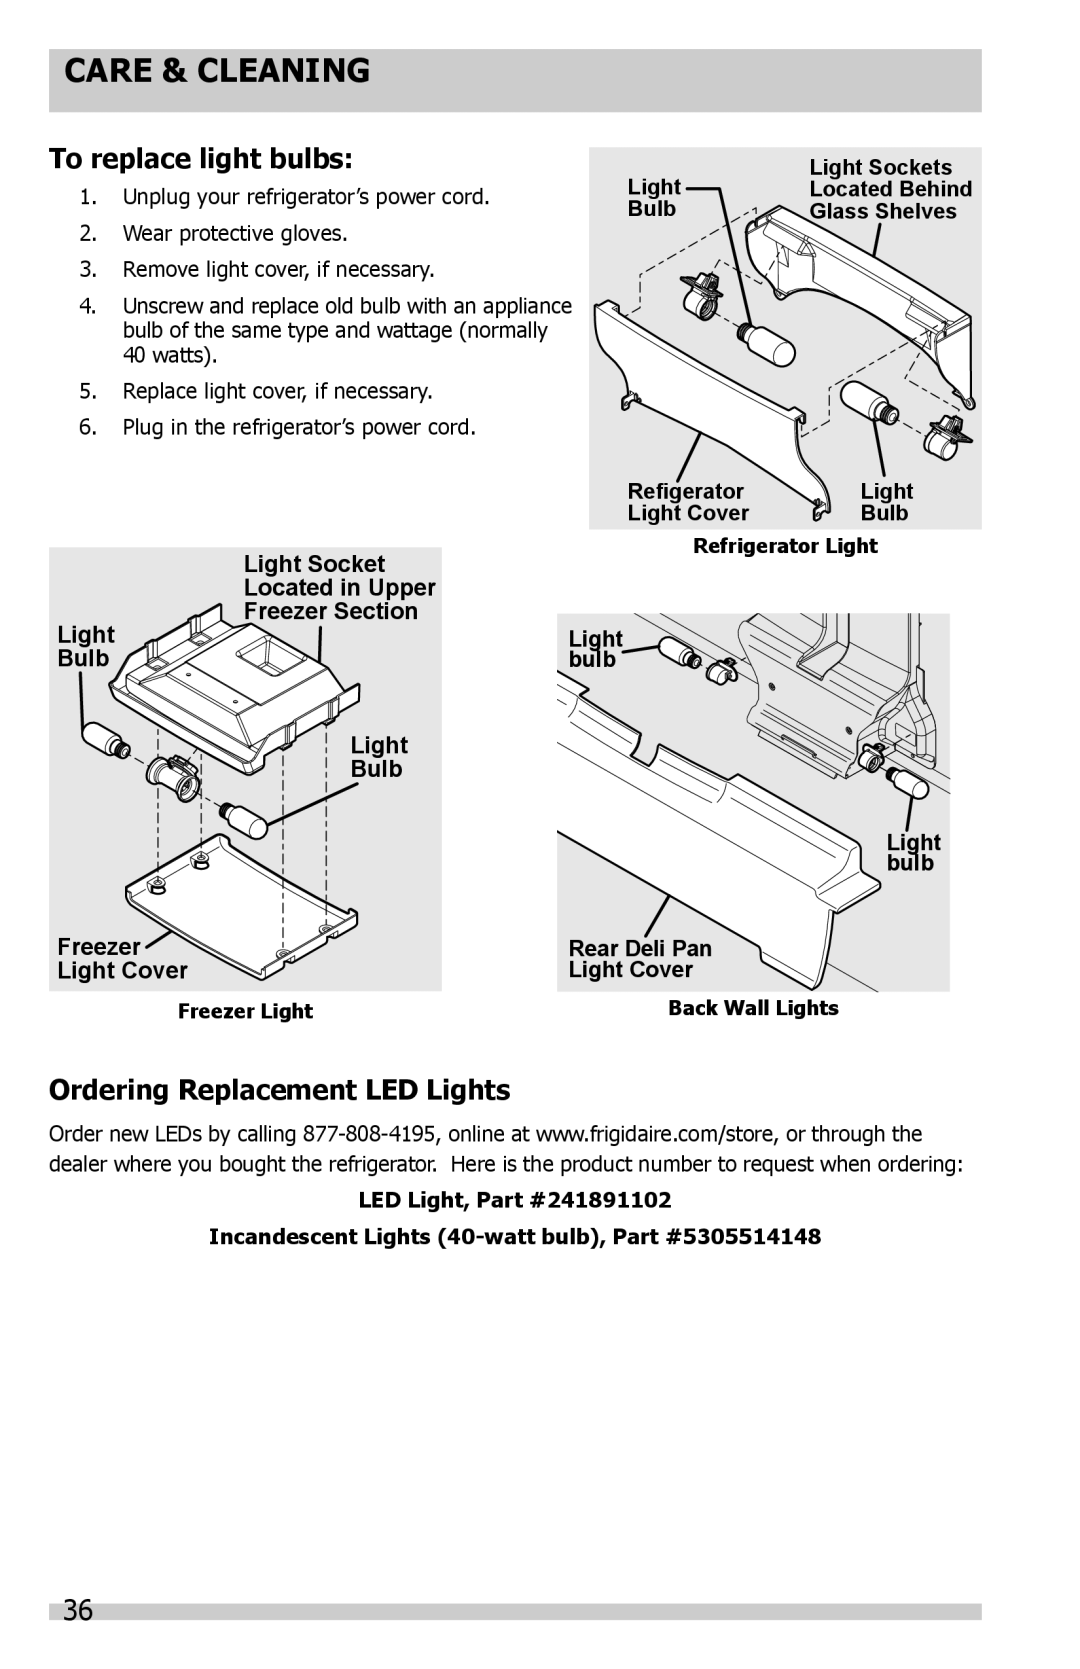 Frigidaire FGUB2642LP To replace light bulbs, Ordering Replacement LED Lights, LED Light Incandescent Lights 40-watt bulb 